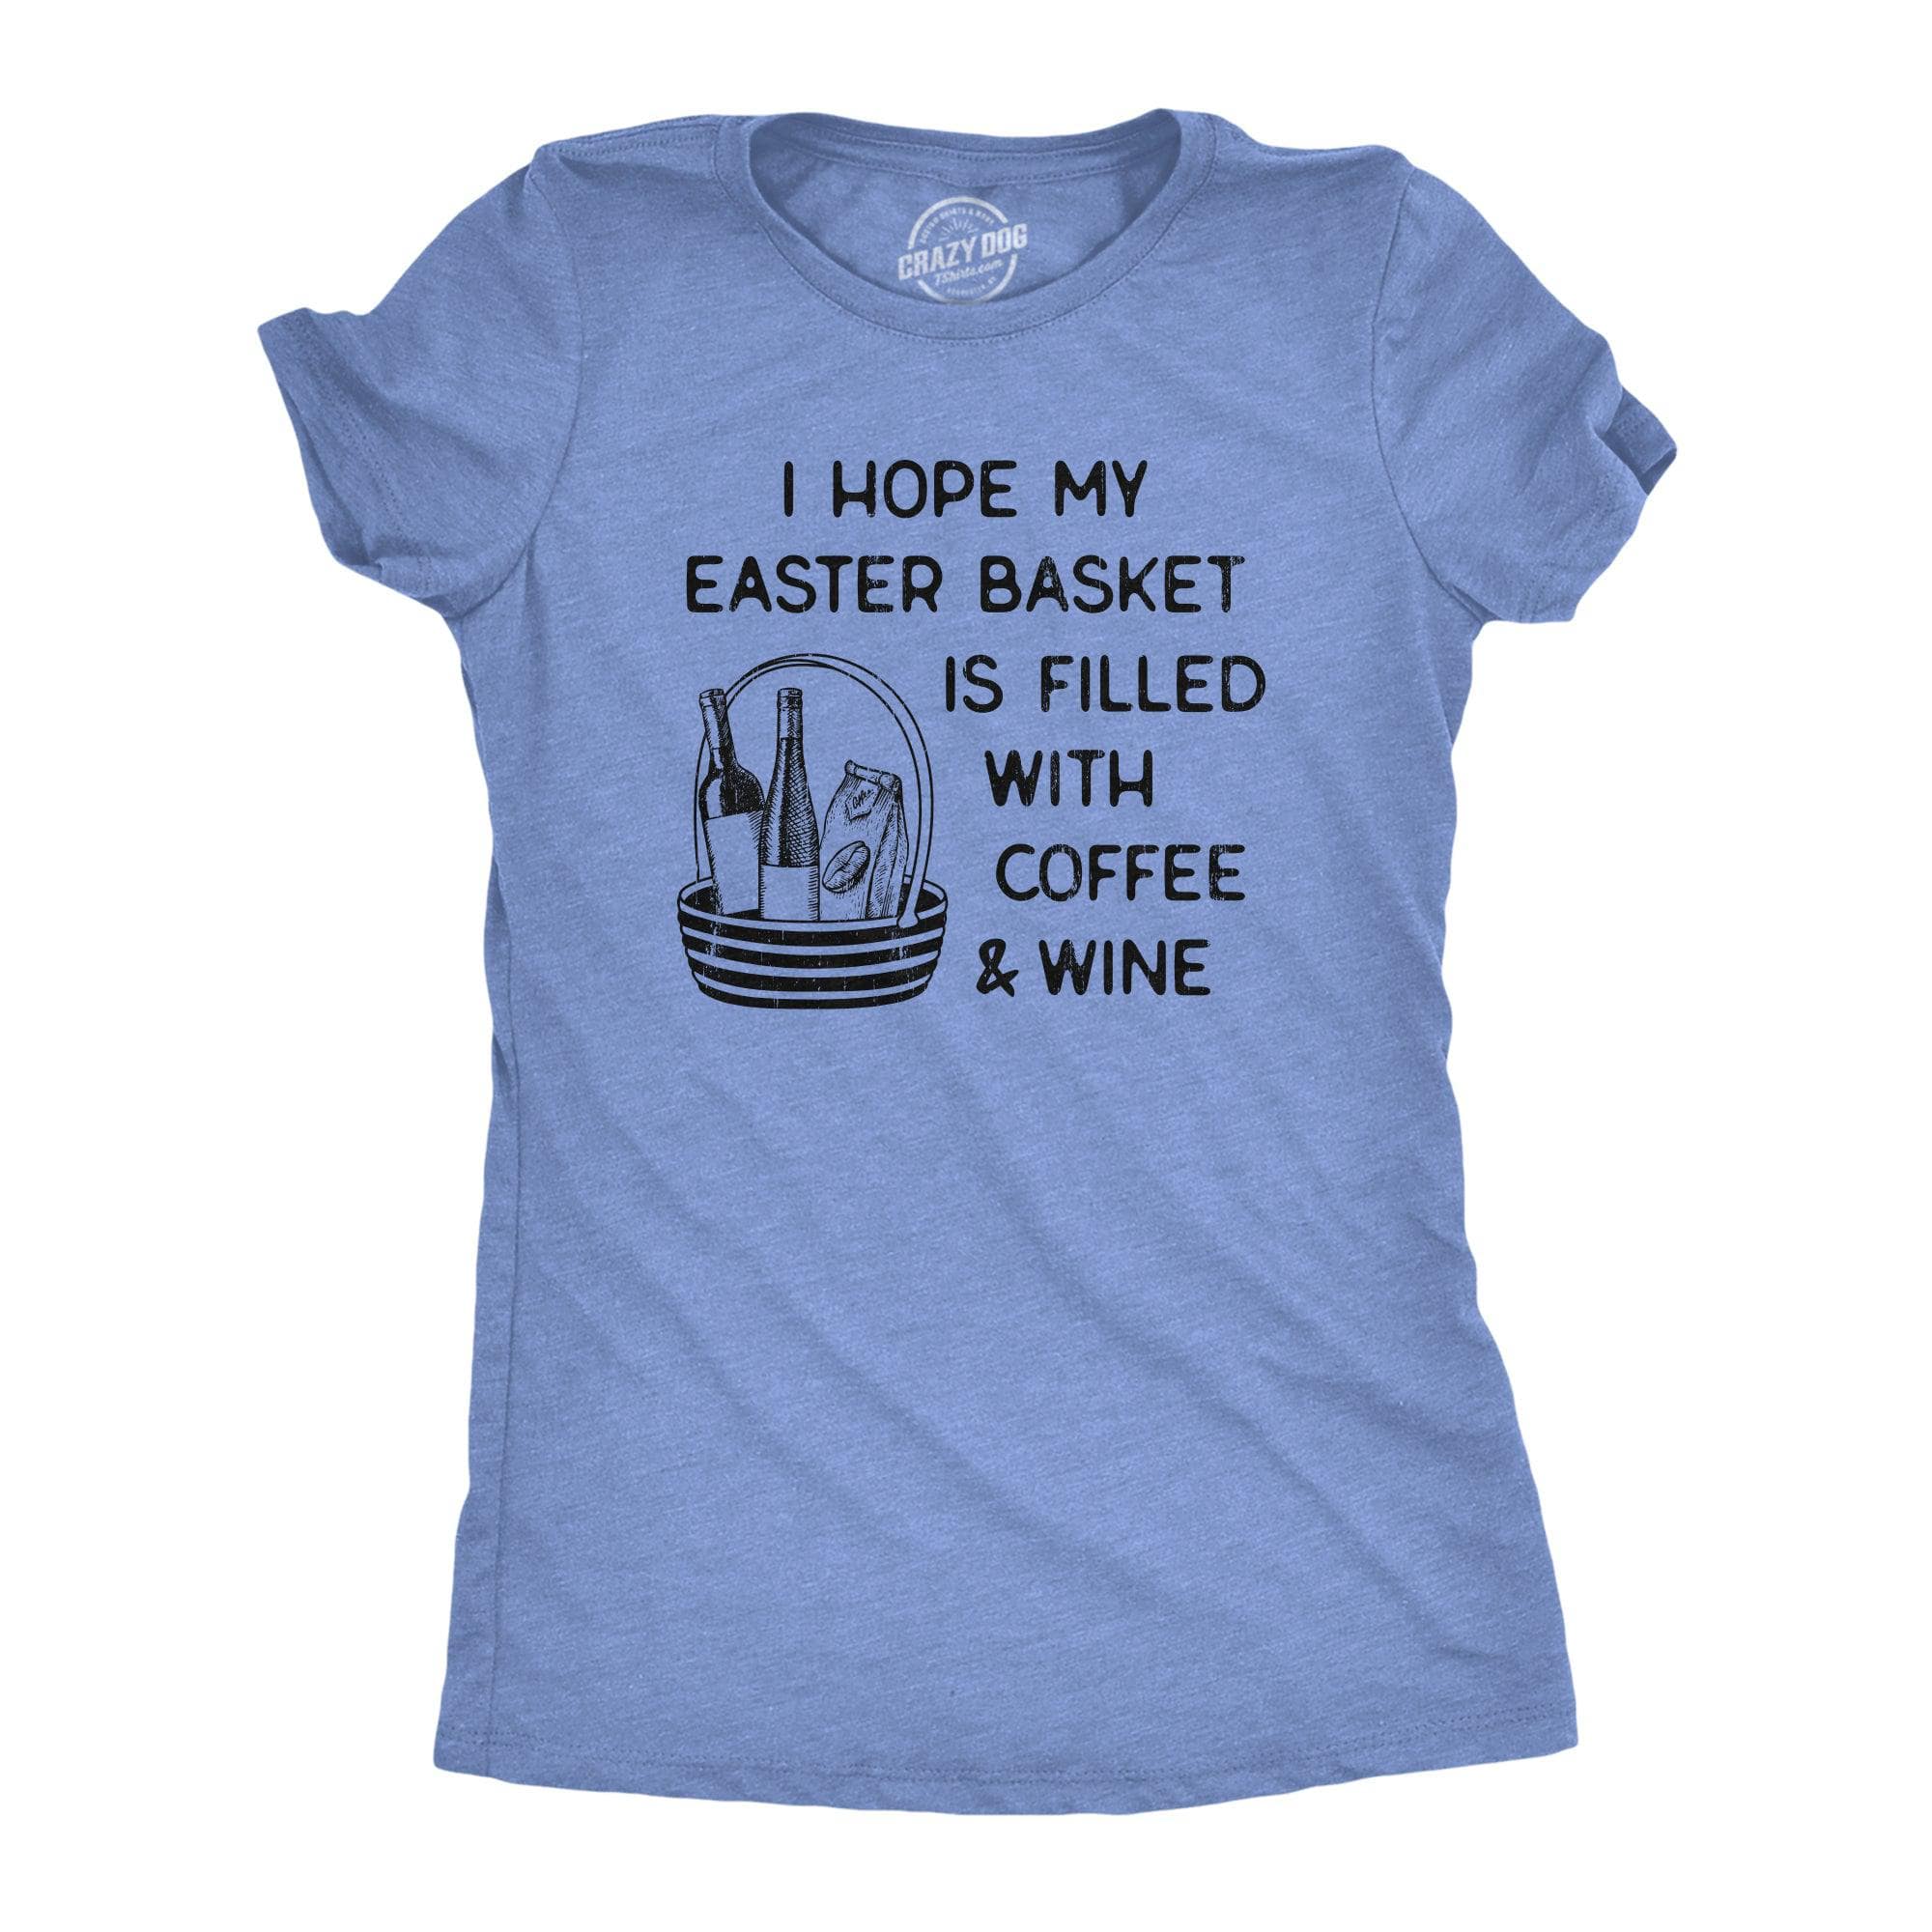 I Hope My Easter Basket Is Filled With Coffee And Wine Women's Tshirt  -  Crazy Dog T-Shirts